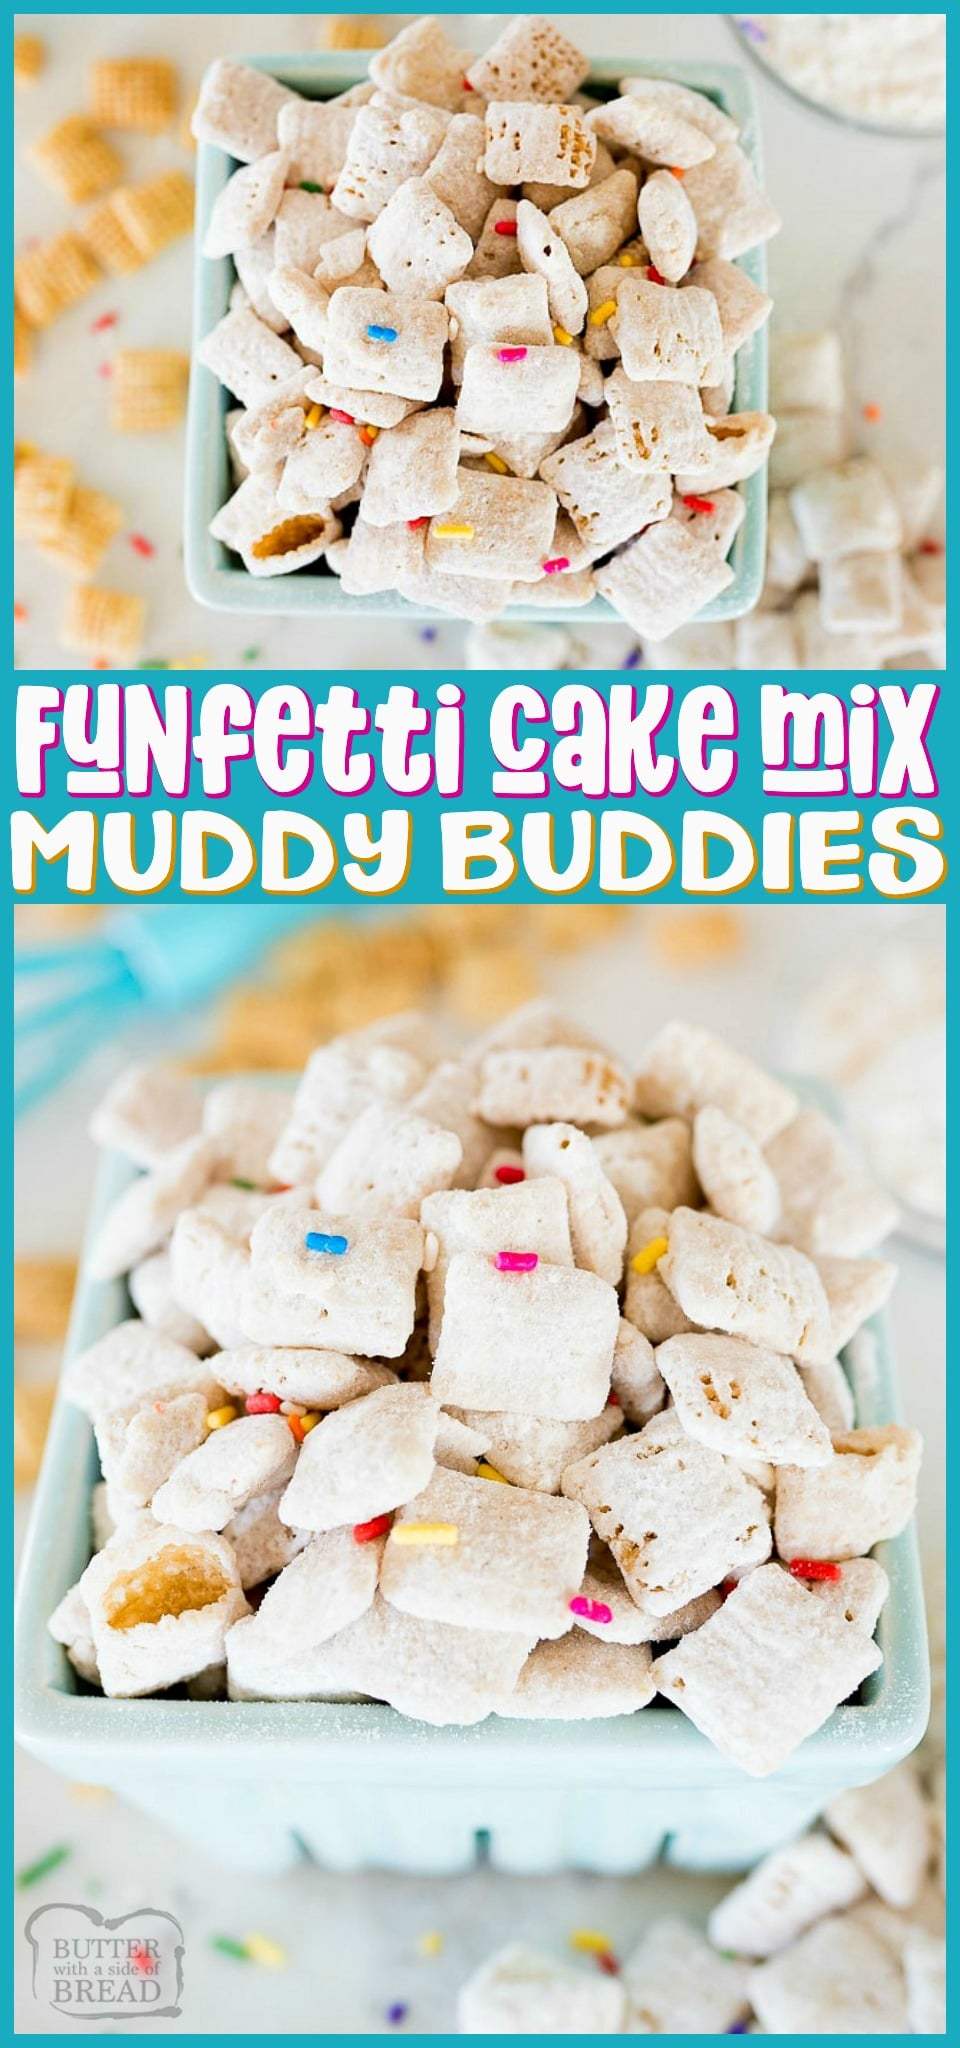 Funfetti Chex Mix is a sweet & crunchy, no bake cereal dessert that is loaded with that birthday cake flavor. With only 5 ingredients and about 5 minutes of work, this is you're new go-to Chex mix! #chex #treats #nobake #funfetti #cakemix #muddybuddies #chexmix #recipe from BUTTER WITH A SIDE OF BREAD